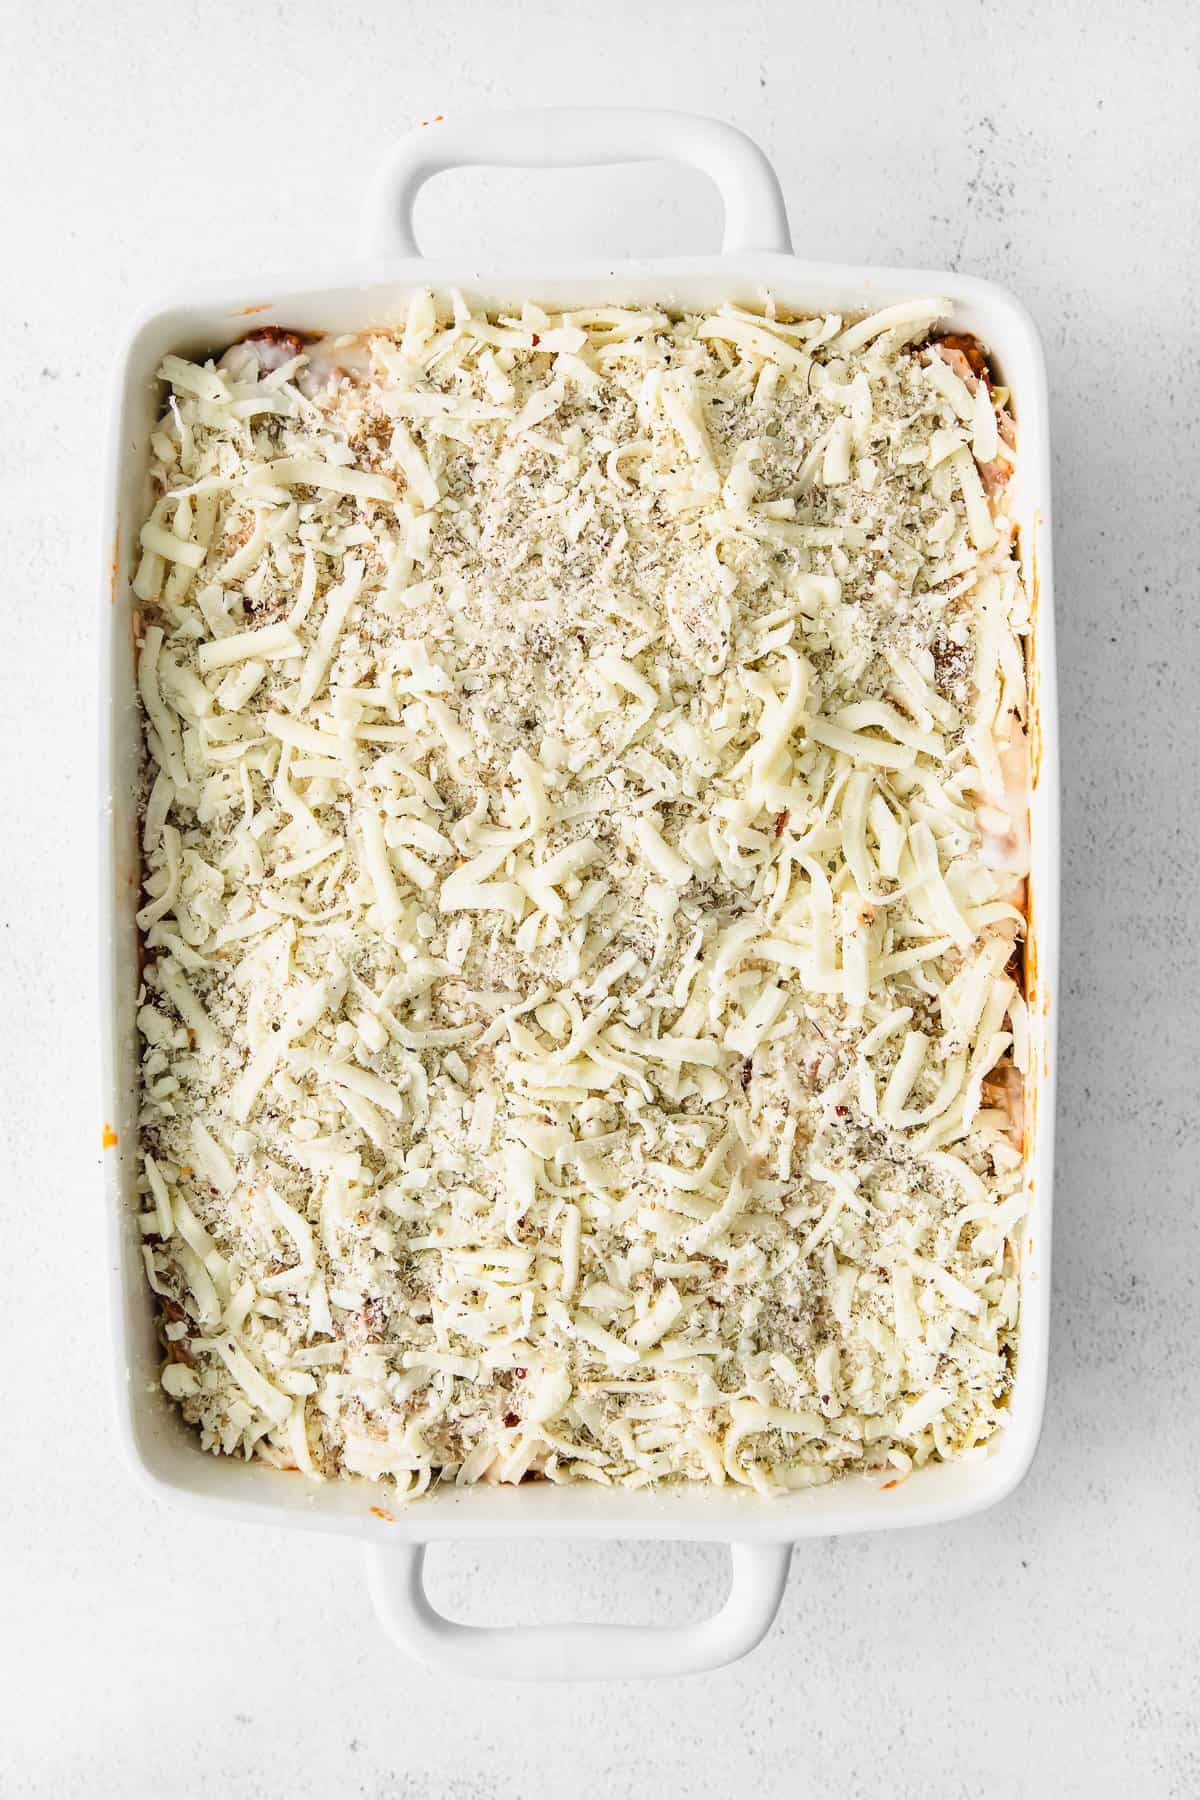 Lasagna covered in shredded cheese in a casserole dish.